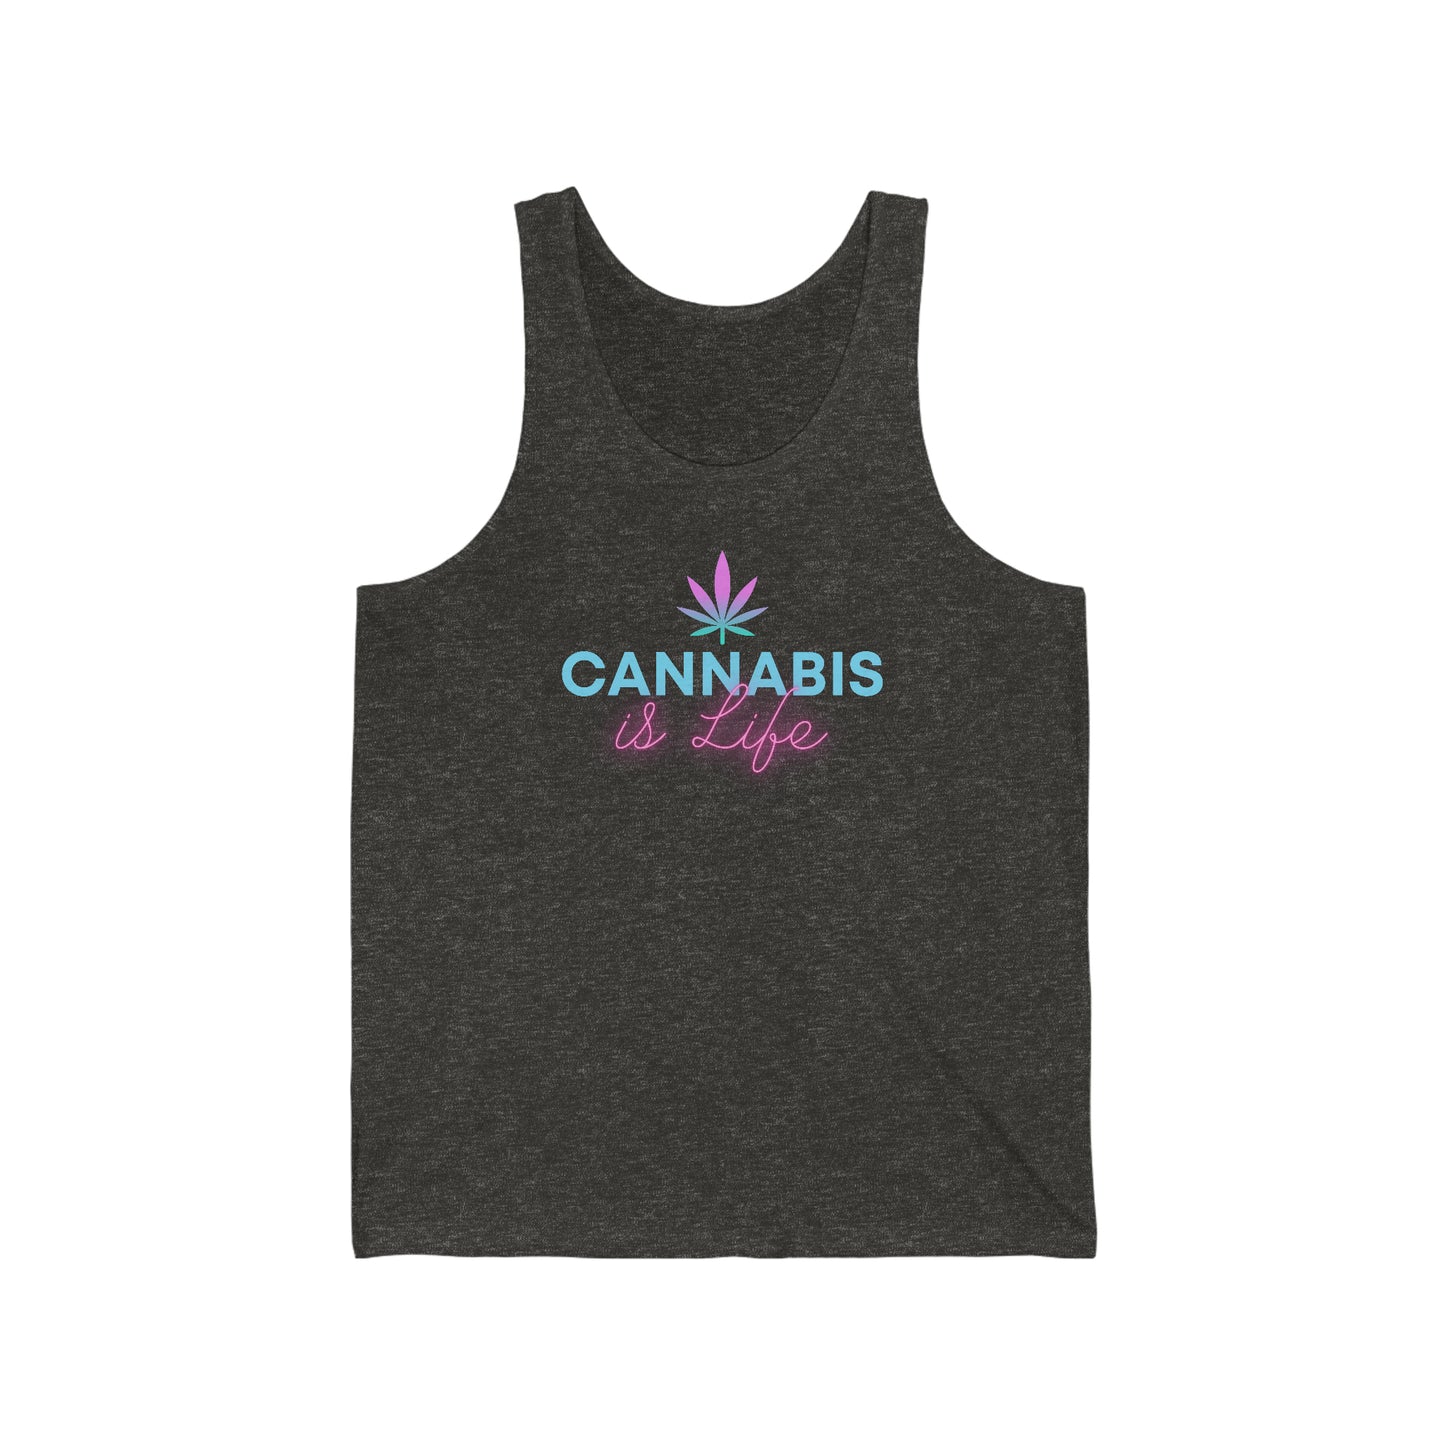 Cannabis is Life Jersey Tank